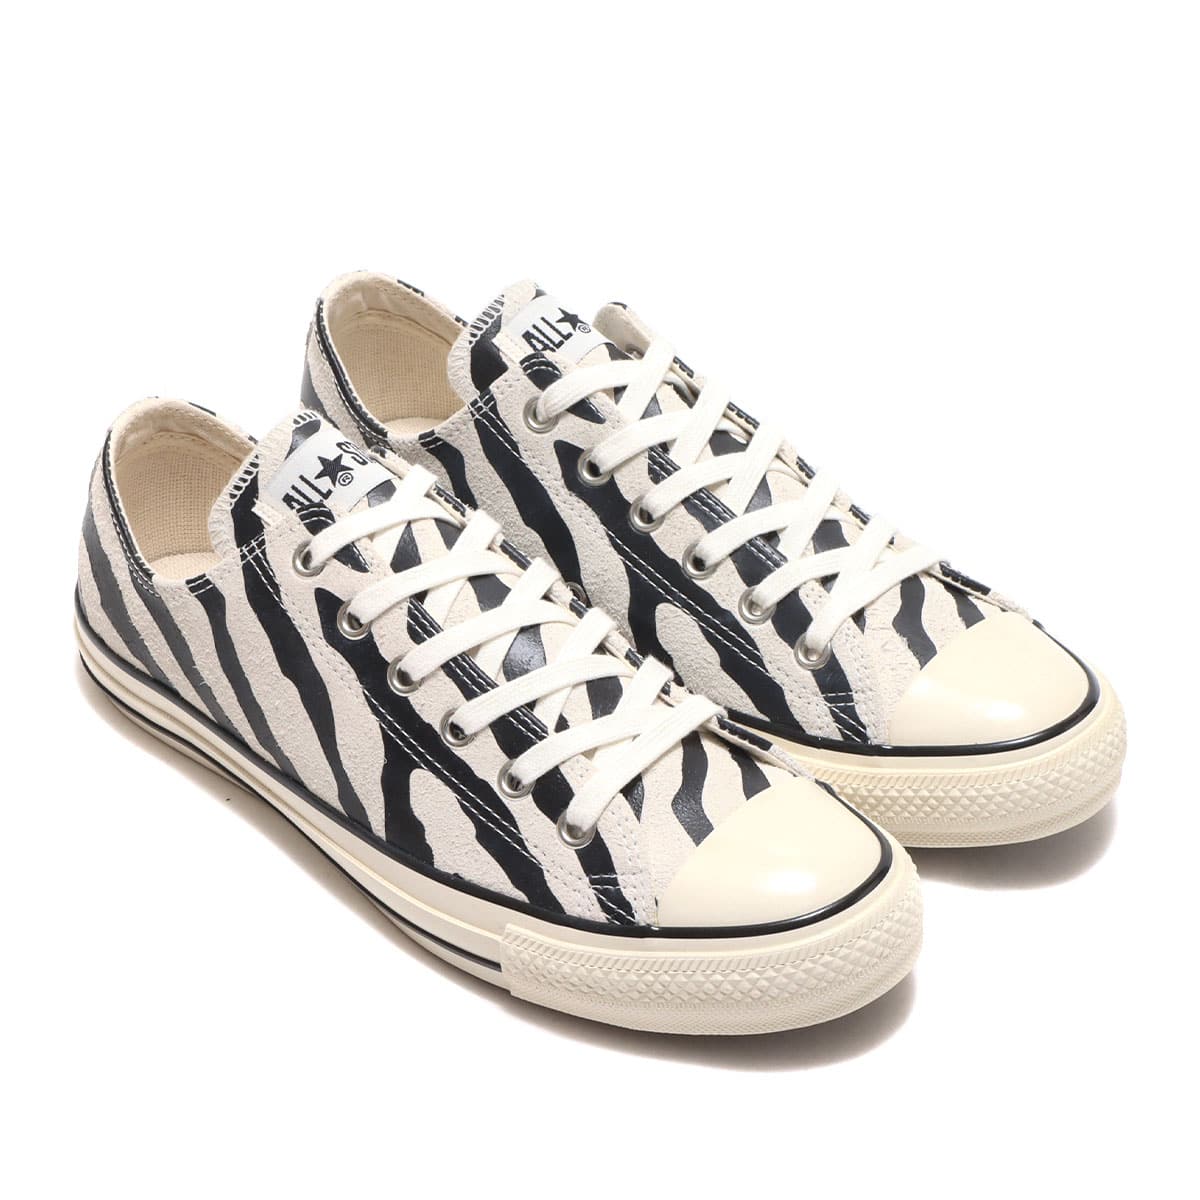 CONVERSE SUEDE ALL STAR US ZEBRA OX WHITE 22FW-I_photo_large